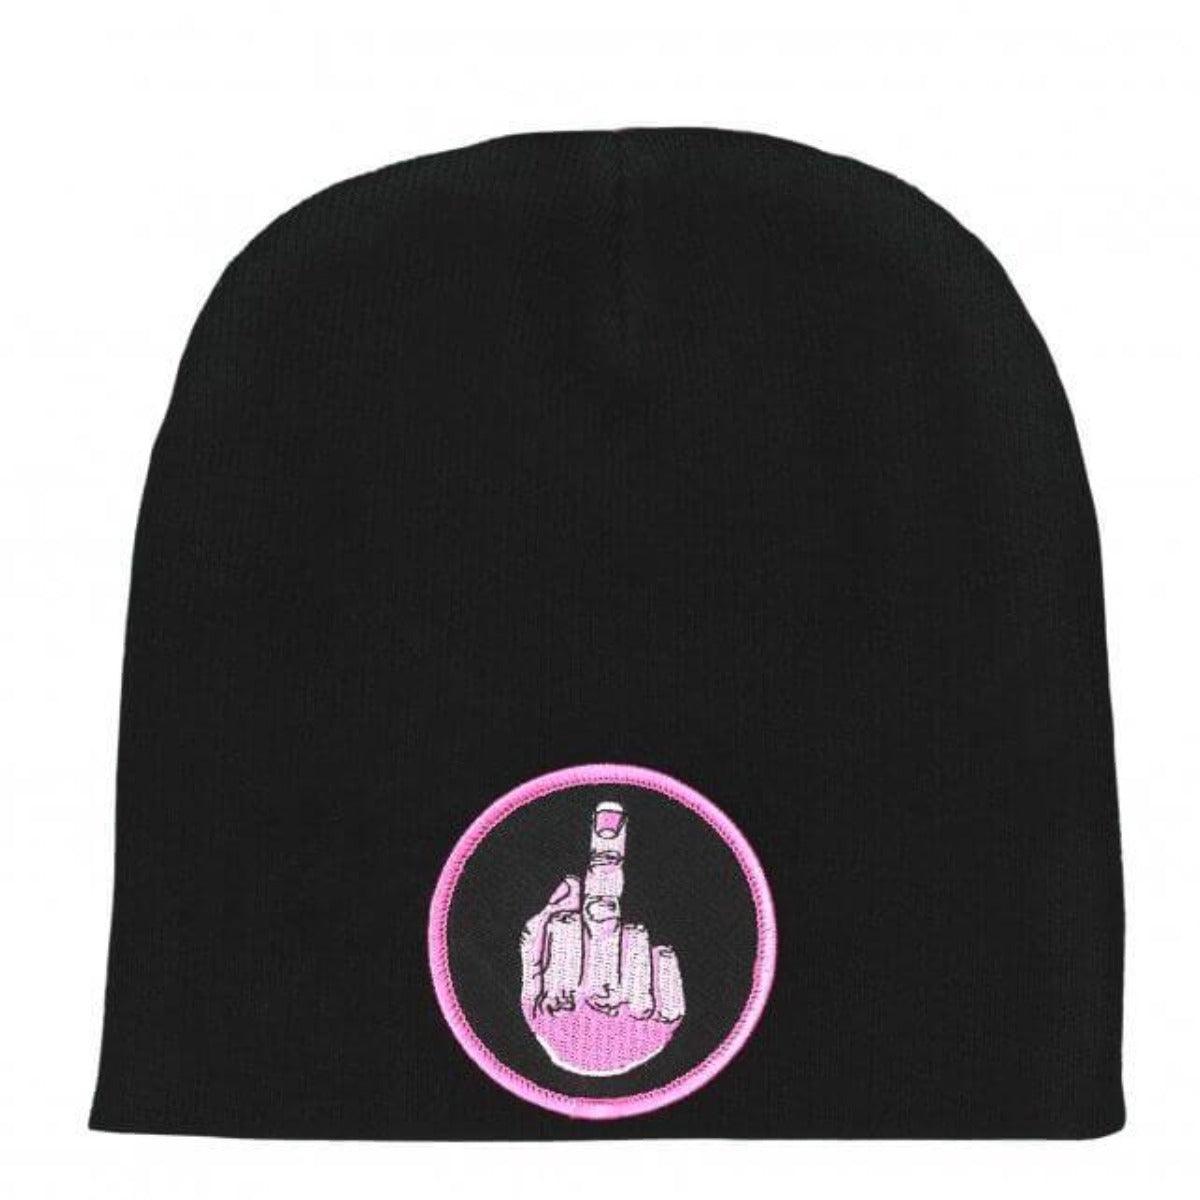 Hot Leathers Middle Finger Pink Knit Hat - American Legend Rider